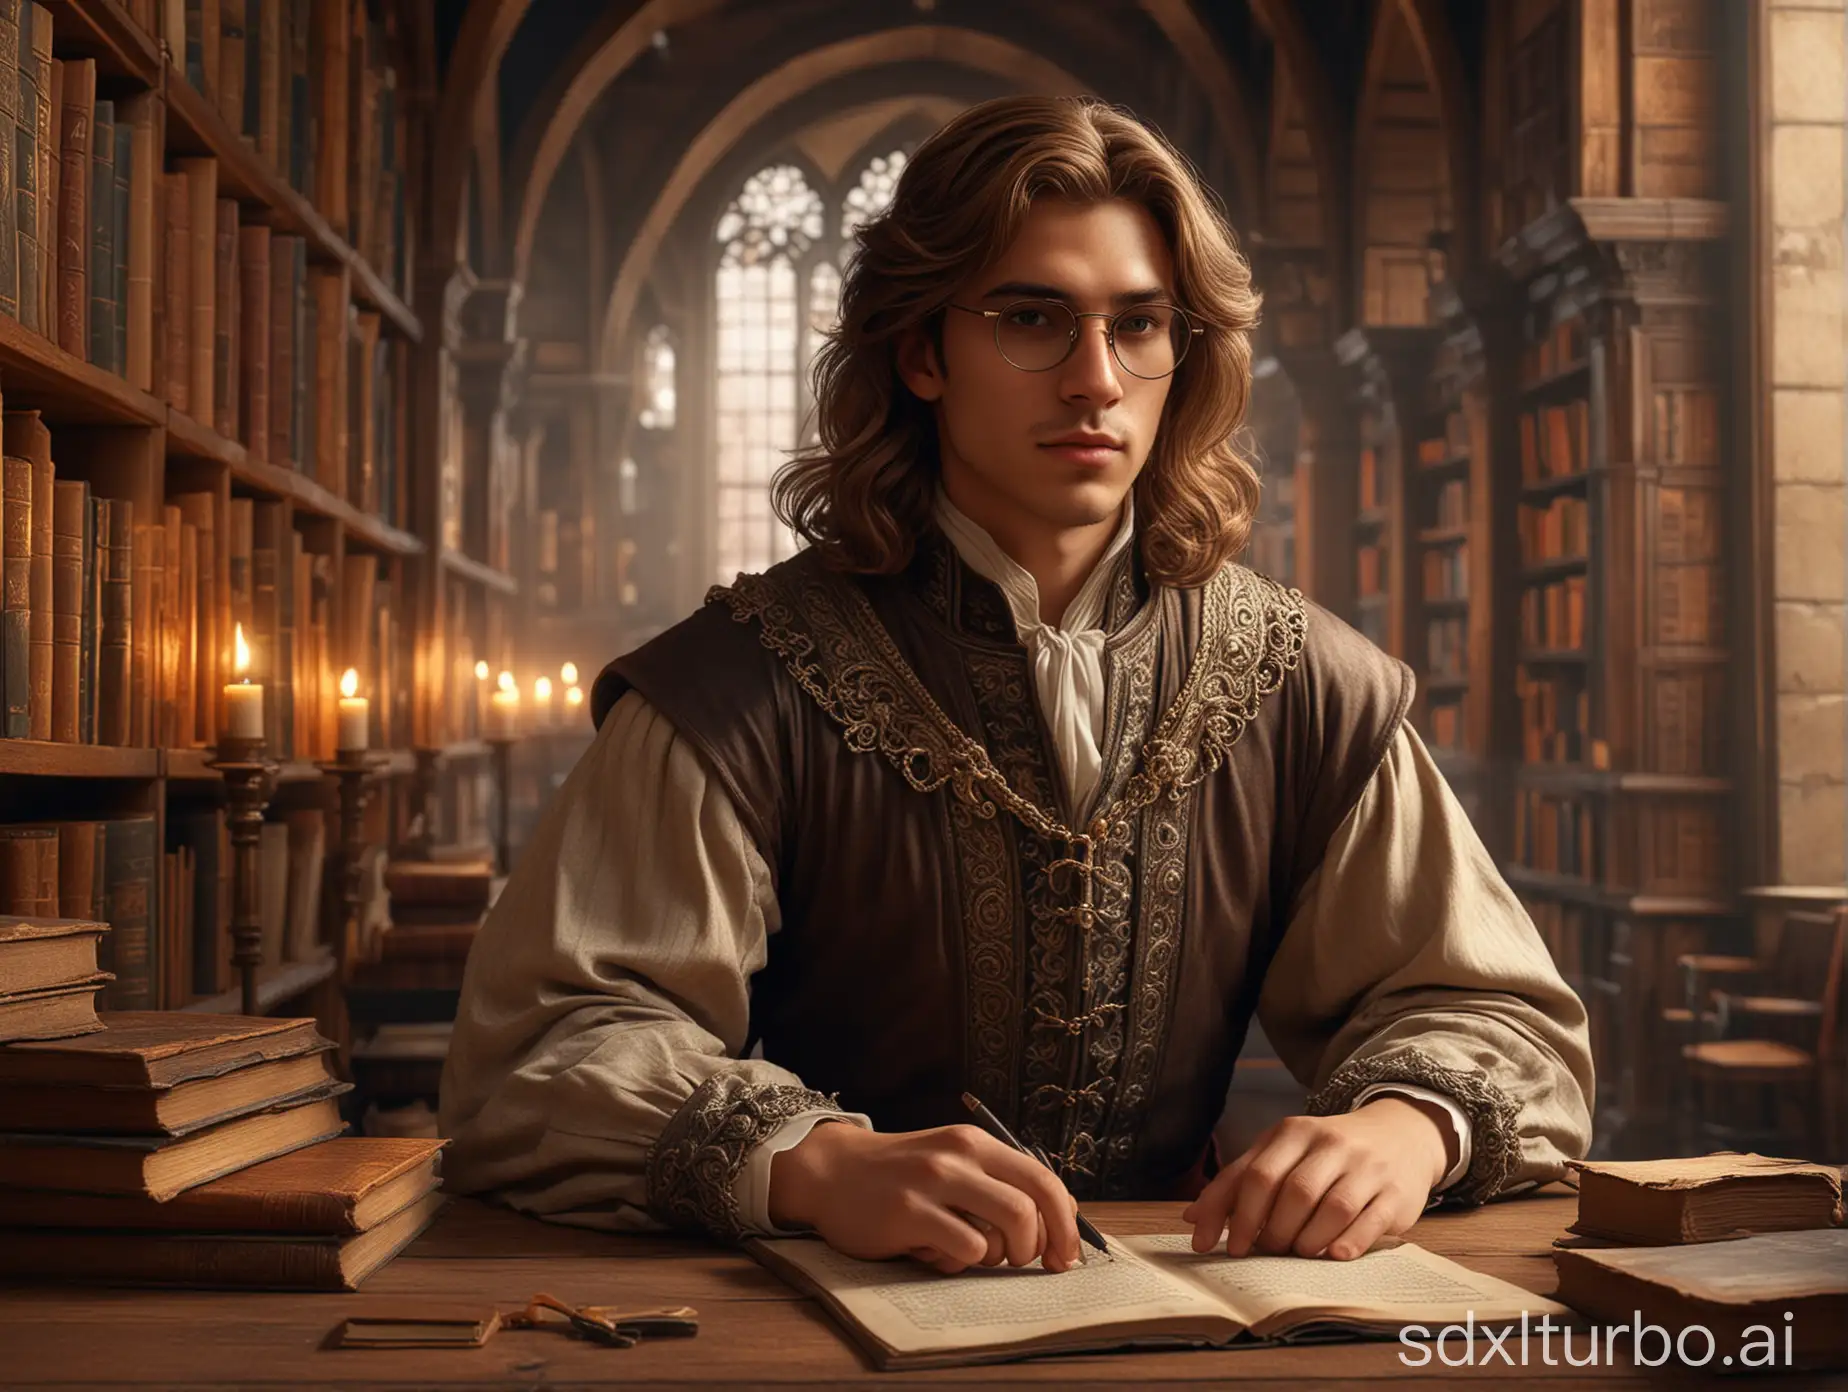 Handsome-Medieval-Man-in-Rich-Attire-Surrounded-by-Ancient-Books-in-an-Old-Library